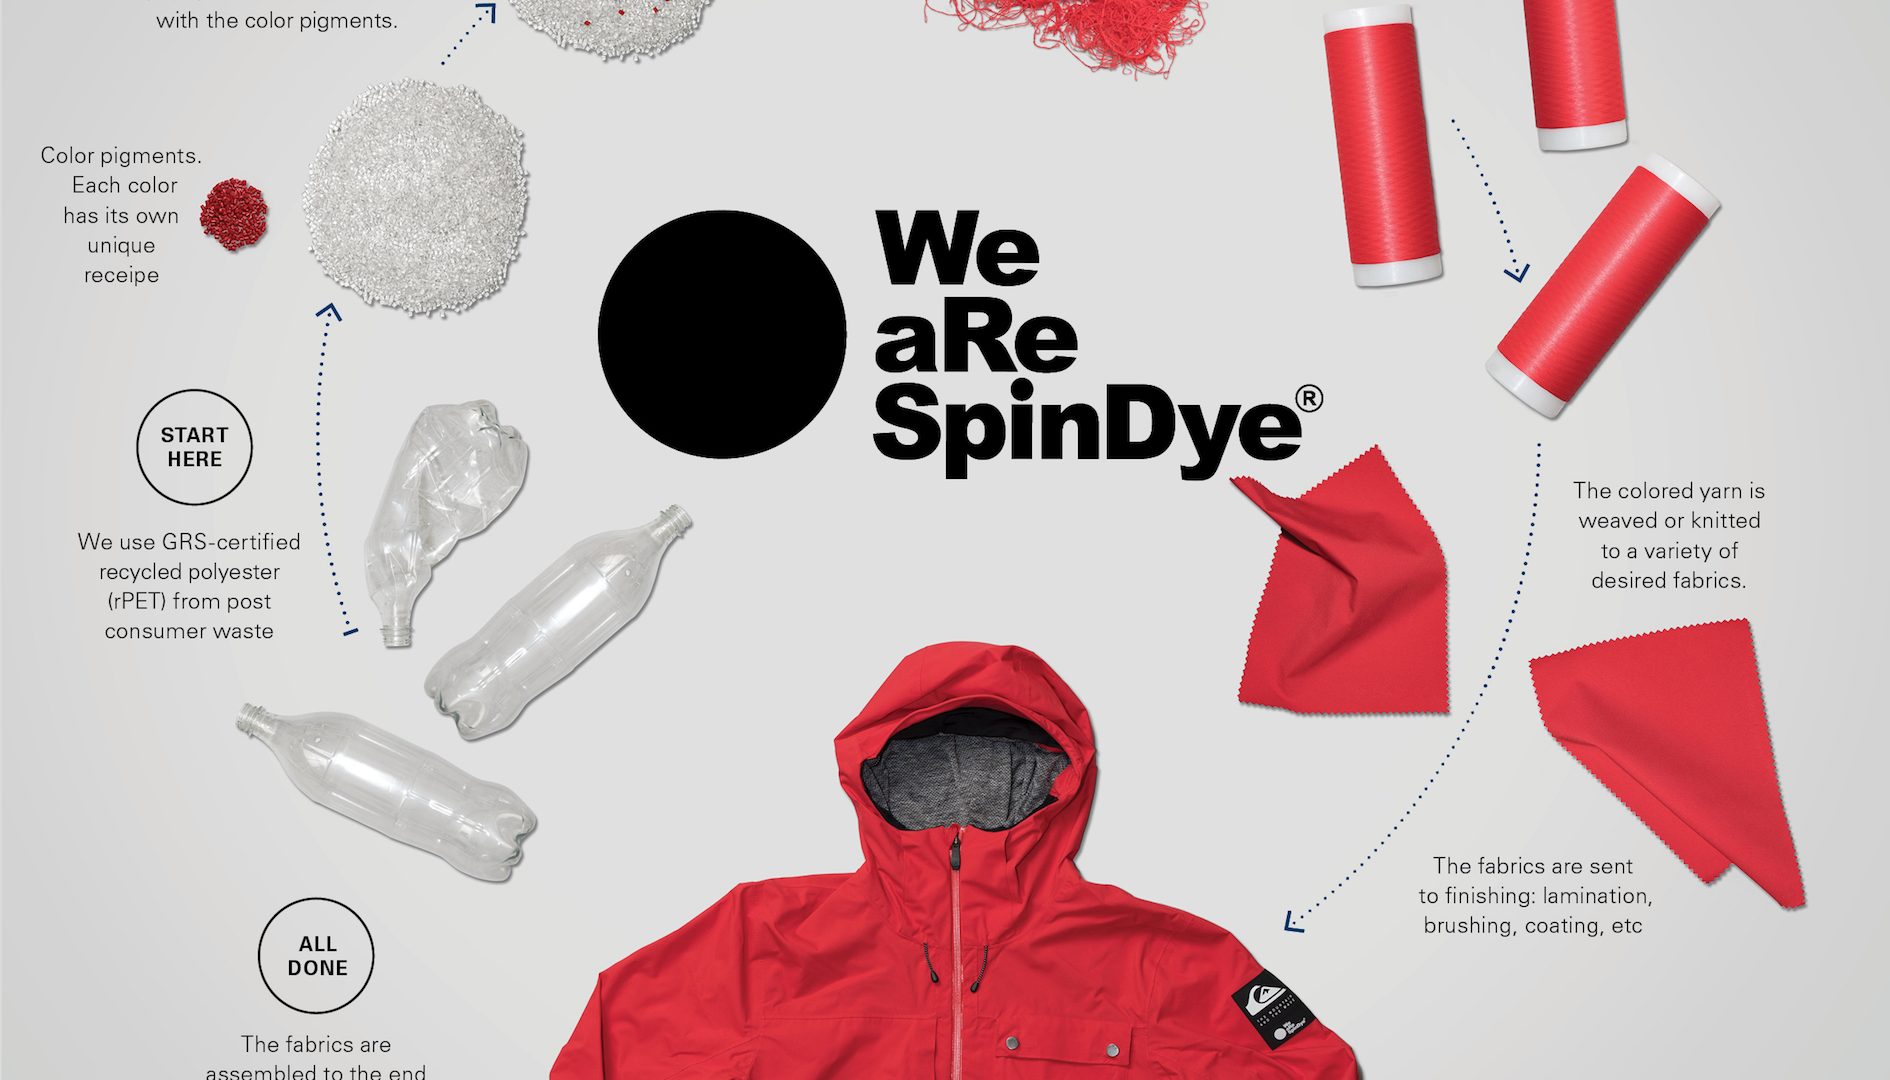 We are Spindye's 2020 Eco Textiles